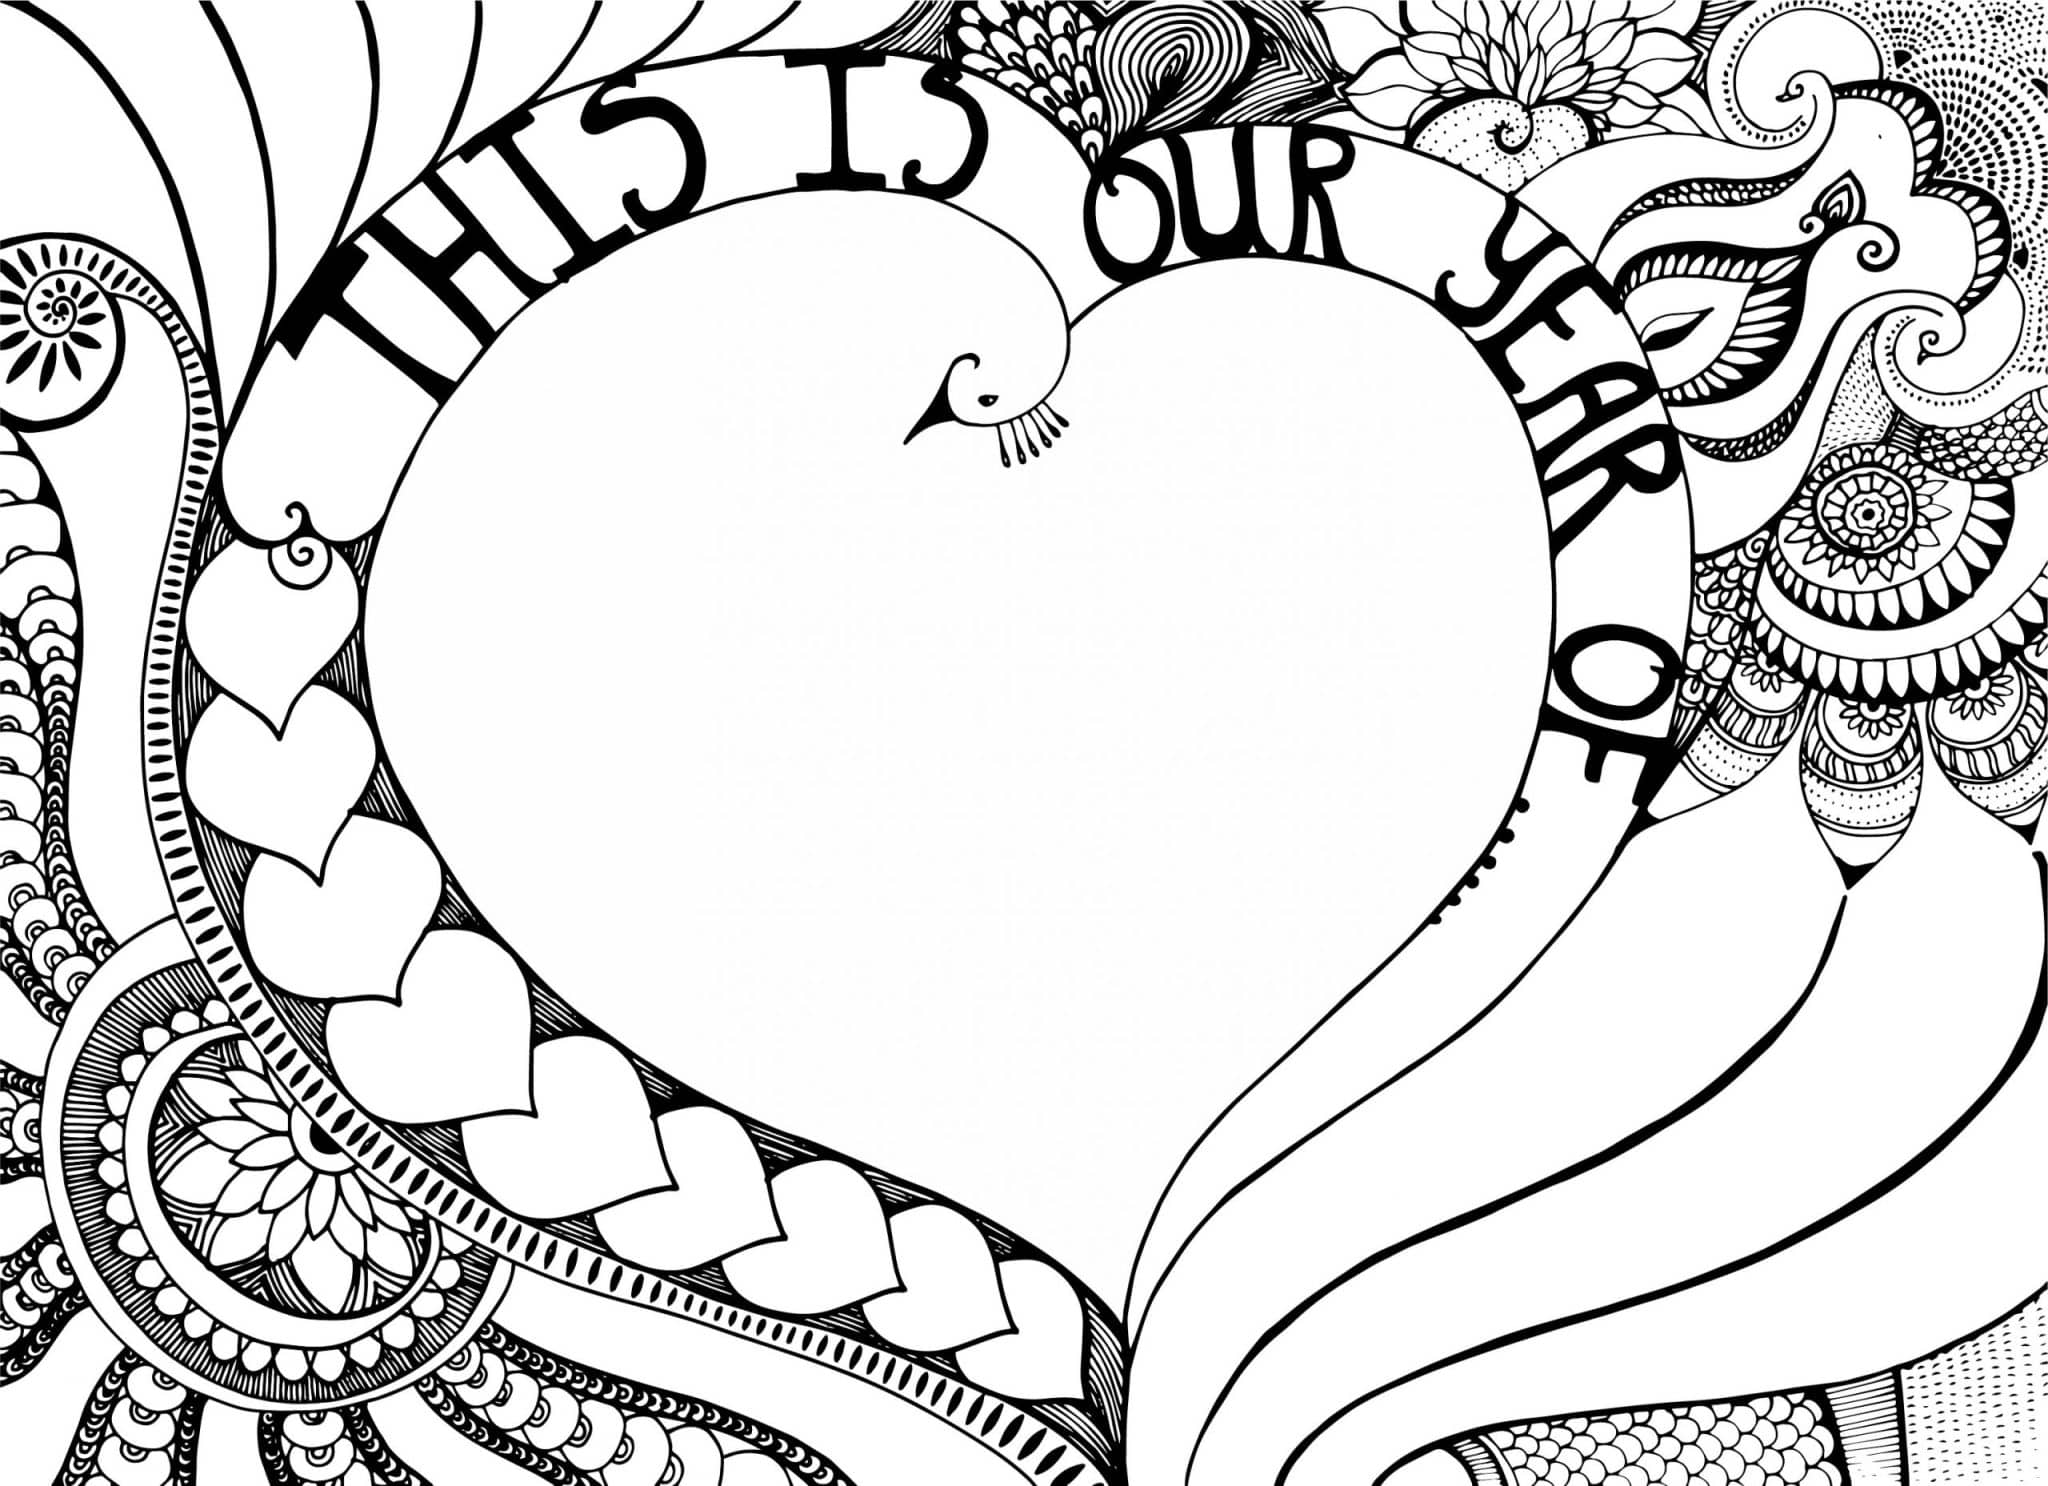 Coloring page this is our year of